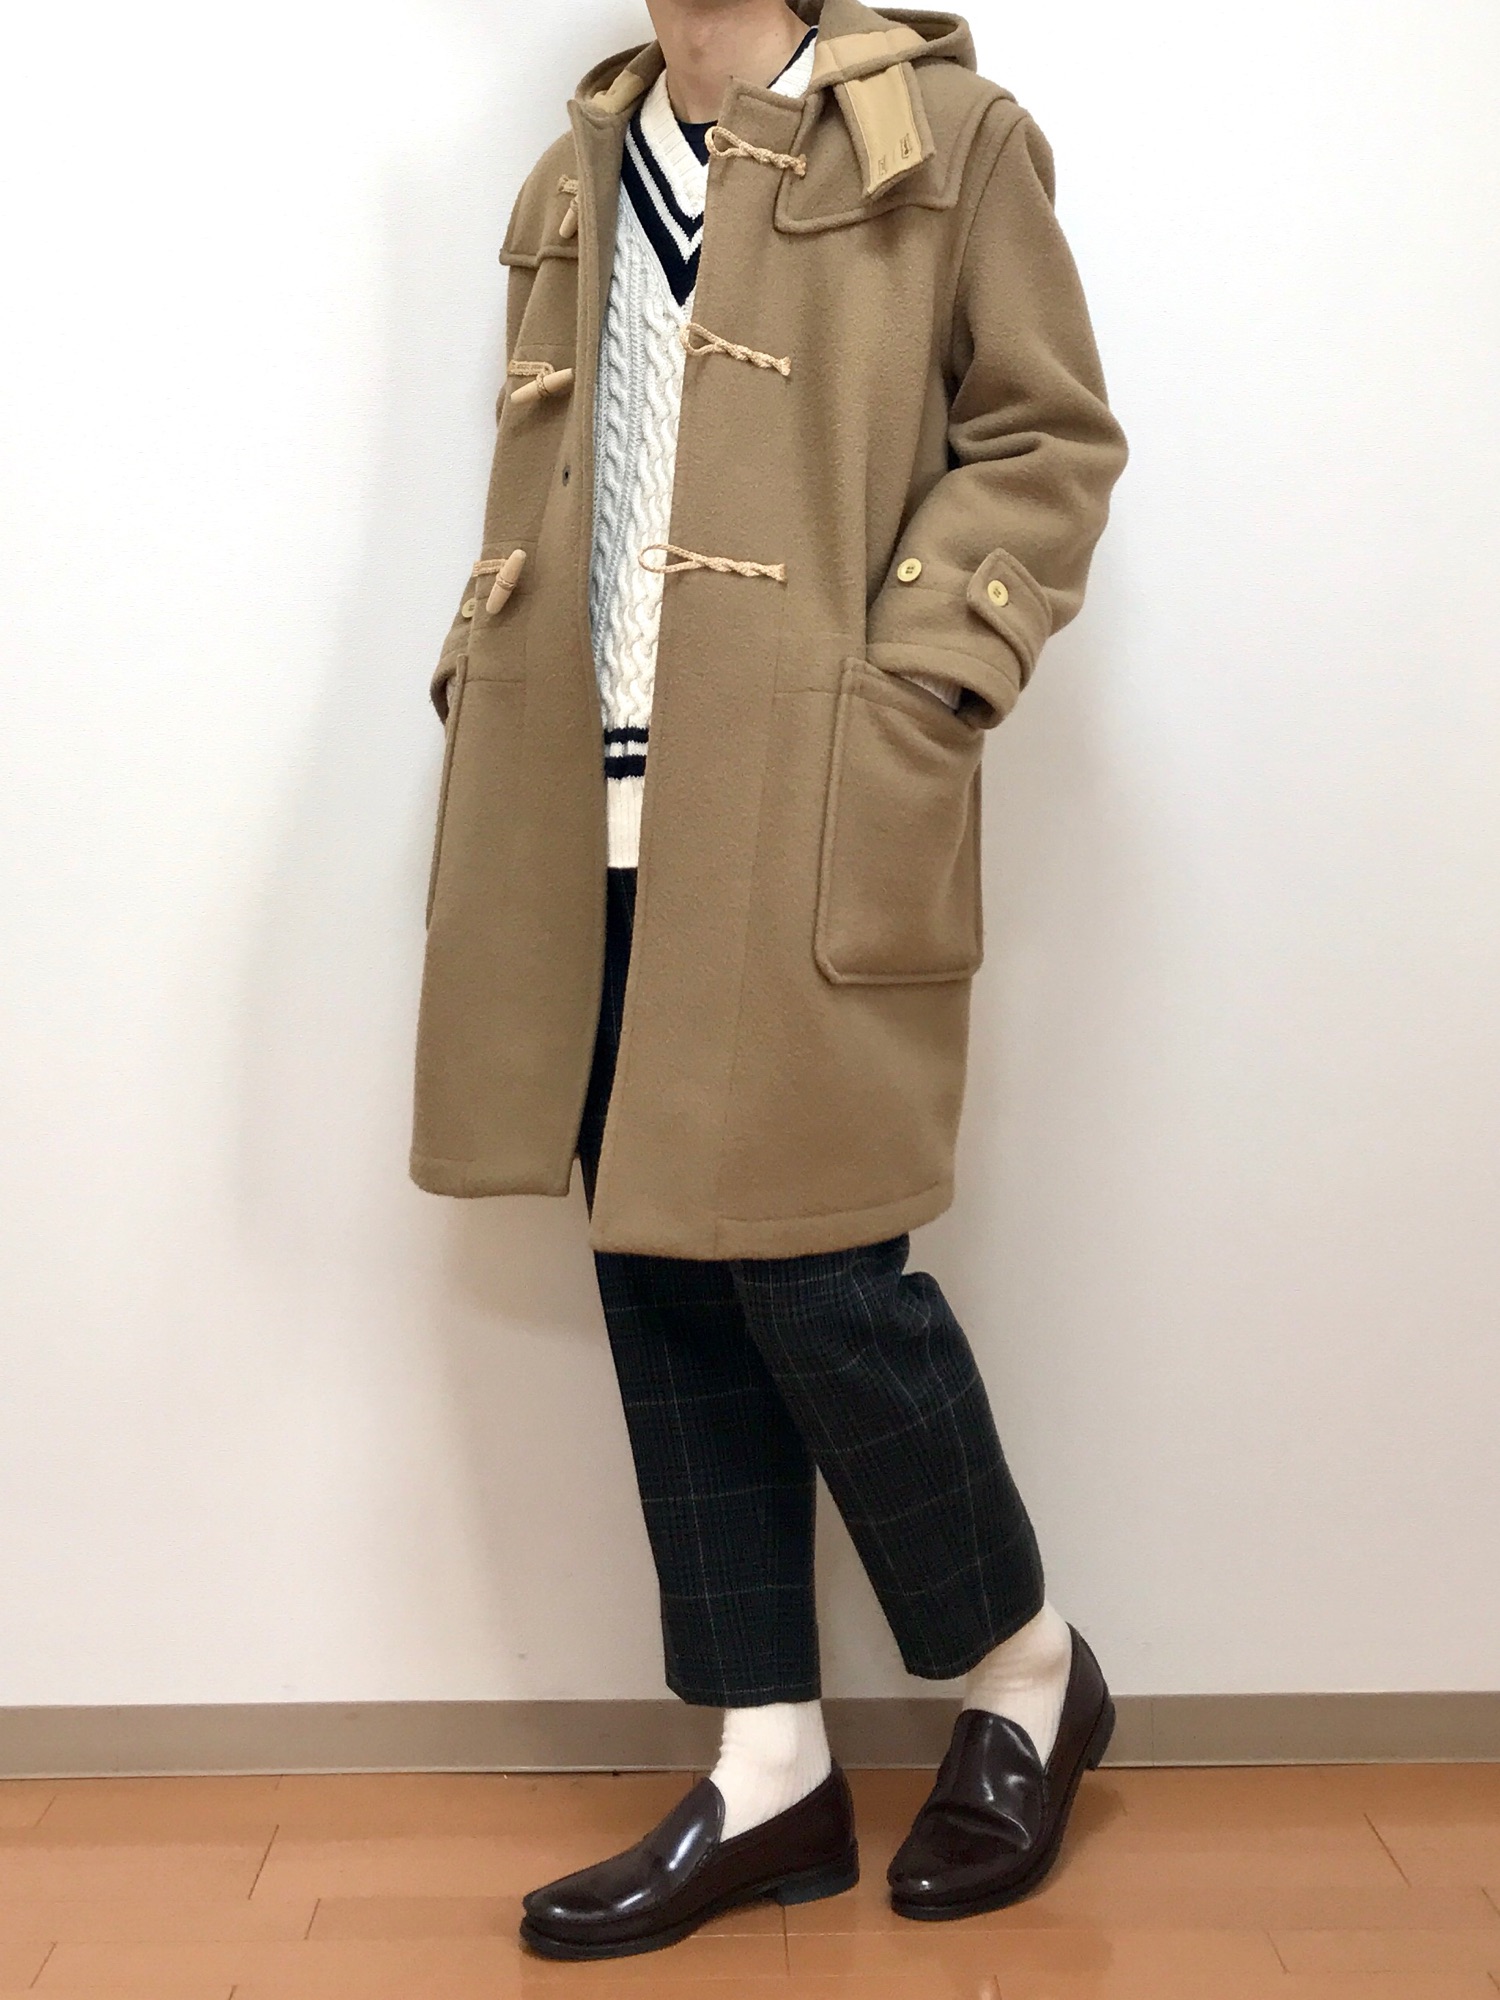 Gloverall（グローバーオール）の「GLOVERALL×JS MONTY DUFFLE COAT 